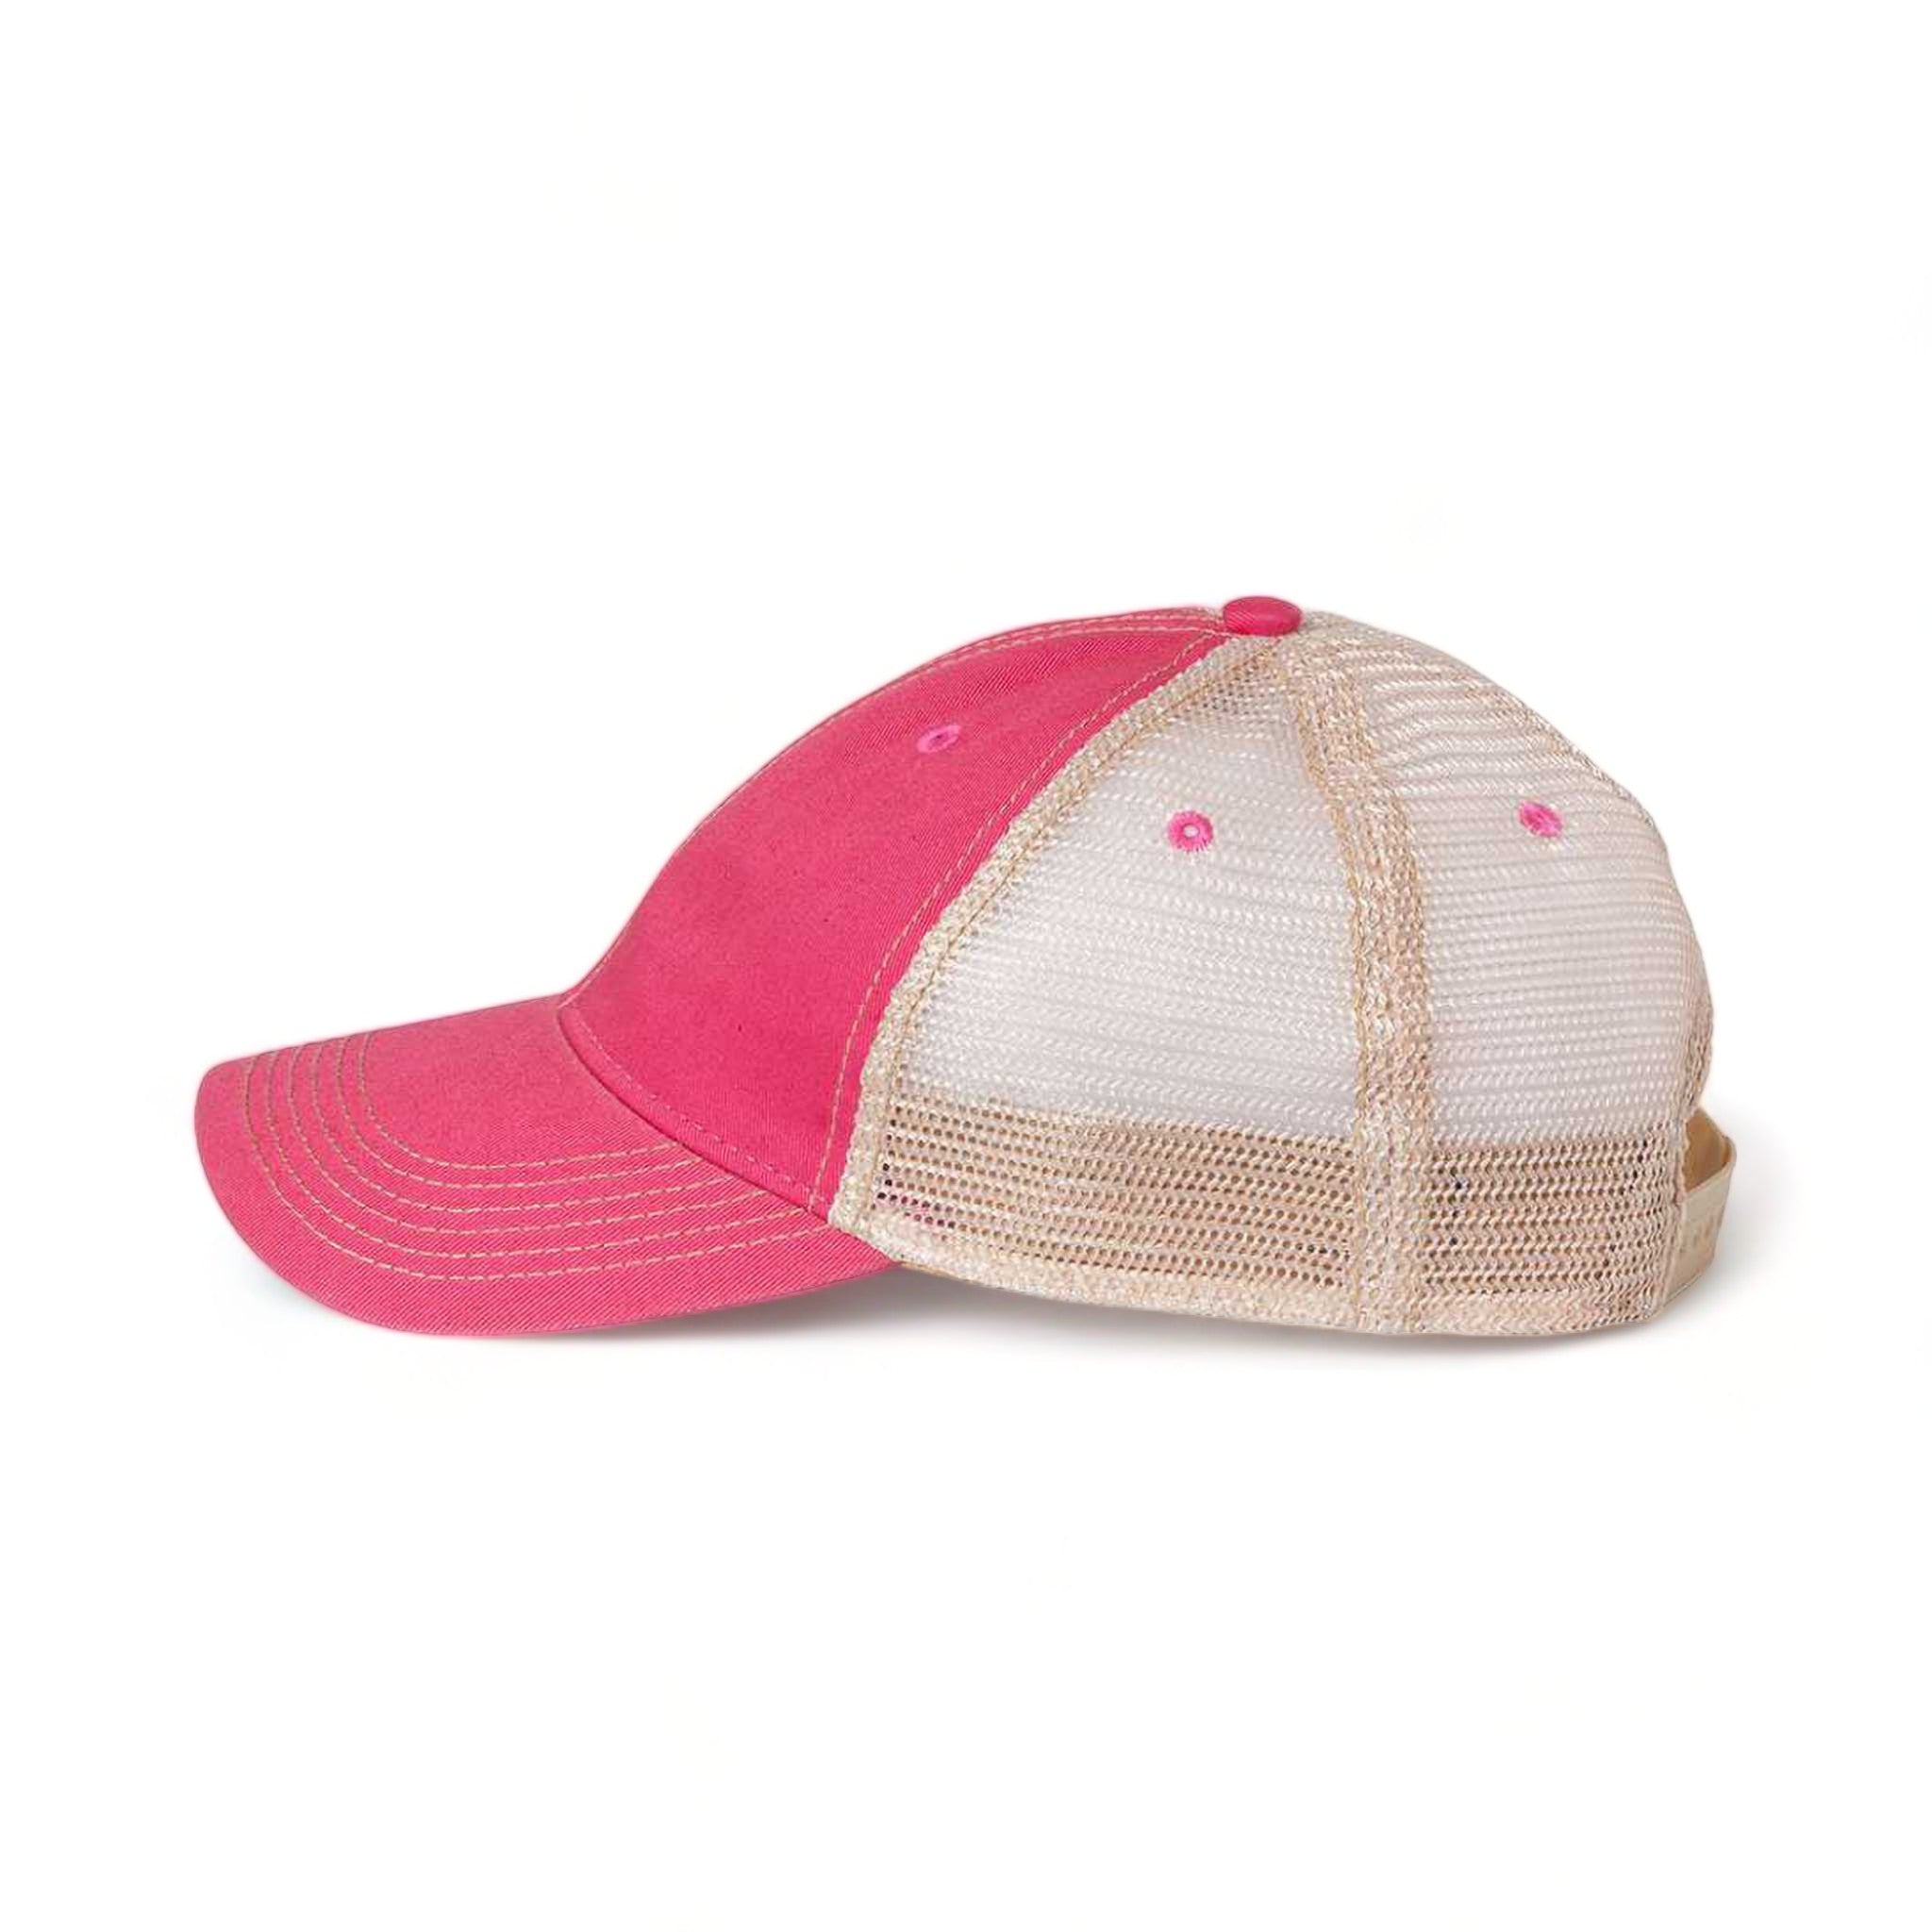 Side view of LEGACY OFA custom hat in dark pink and khaki